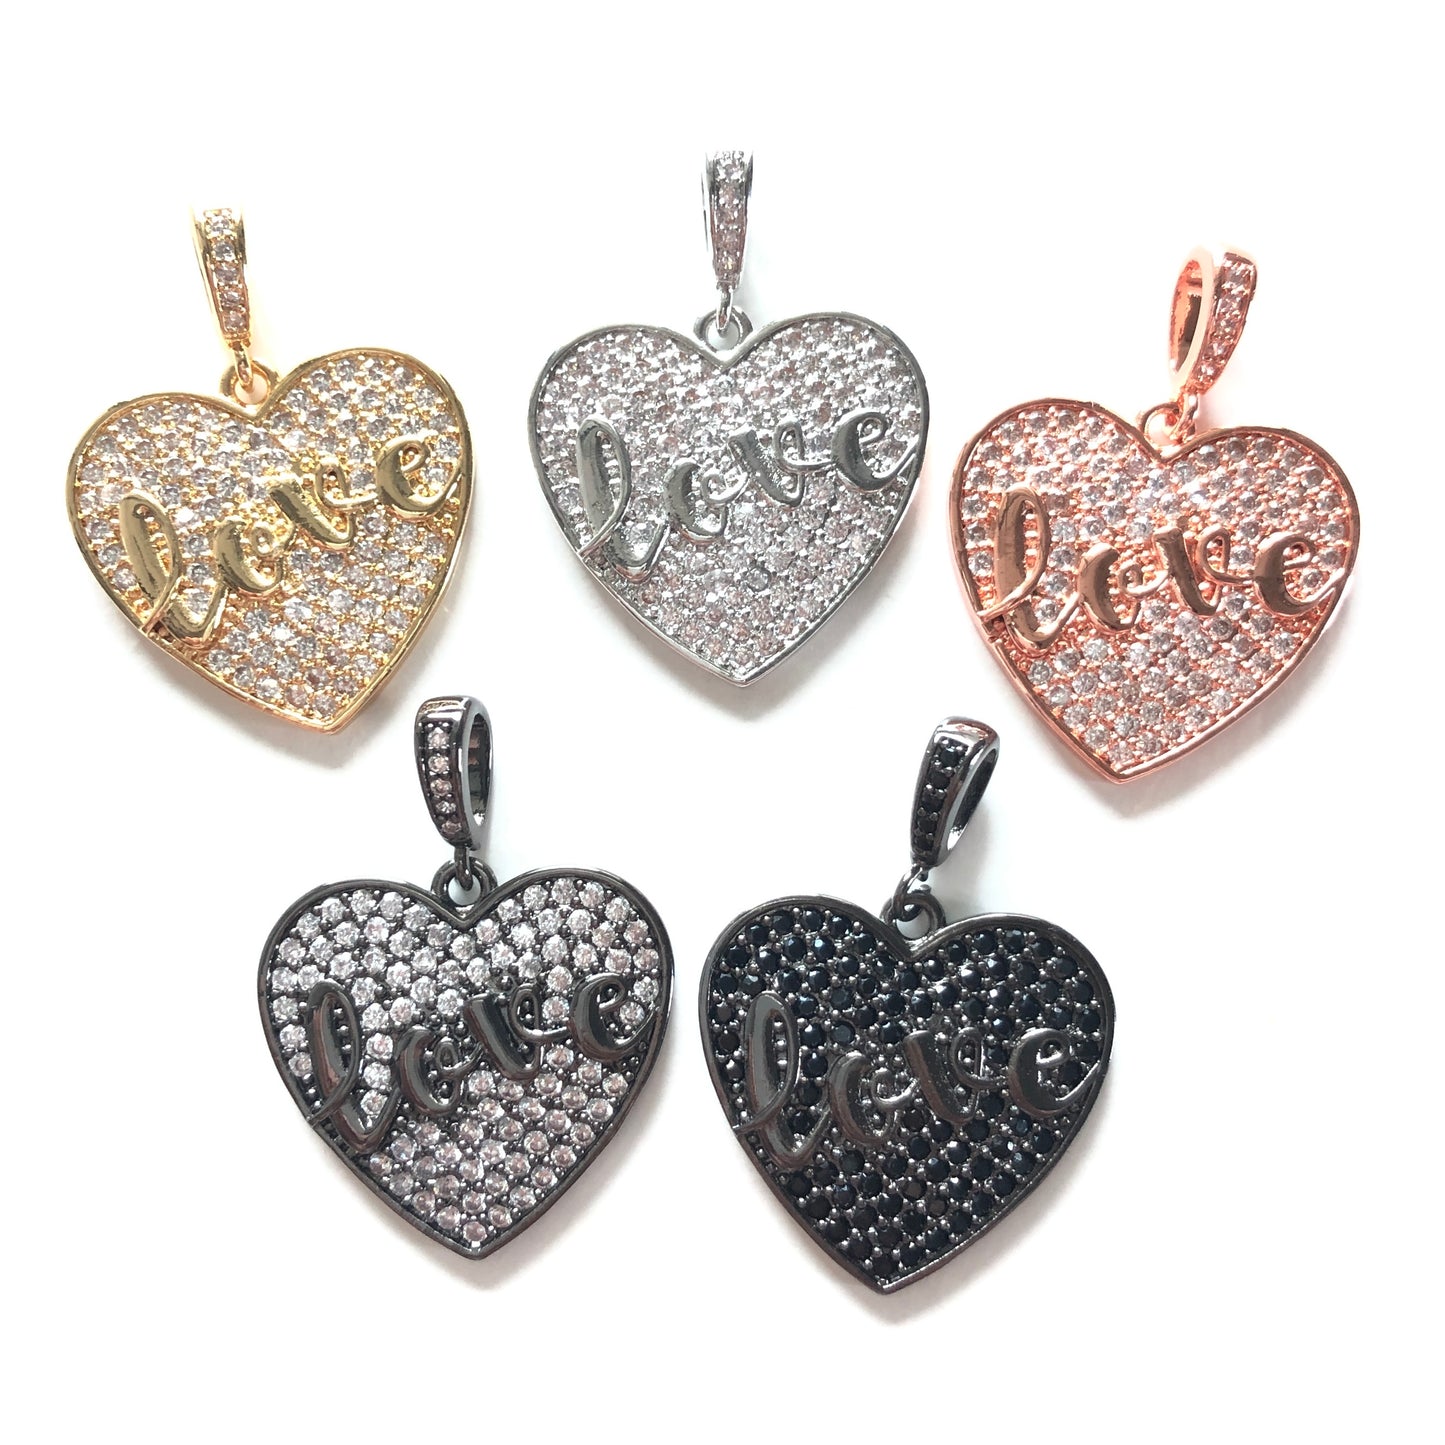 10pcs/lot 25*24mm CZ Paved Love Heart Charms CZ Paved Charms Hearts Love Letters On Sale Charms Beads Beyond